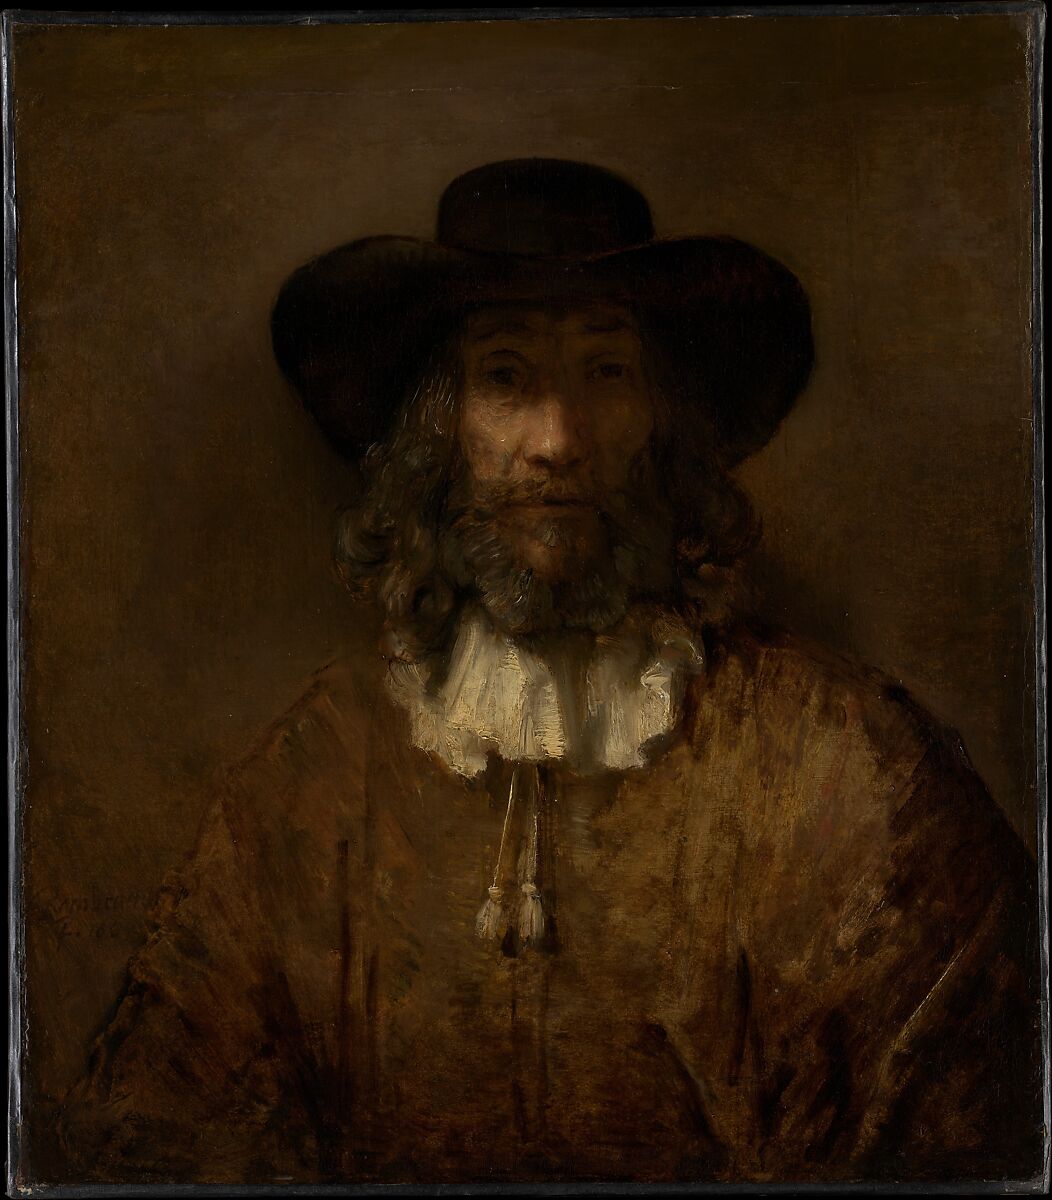 Man with a Beard, Style of Rembrandt (17th century or later), Oil on canvas 